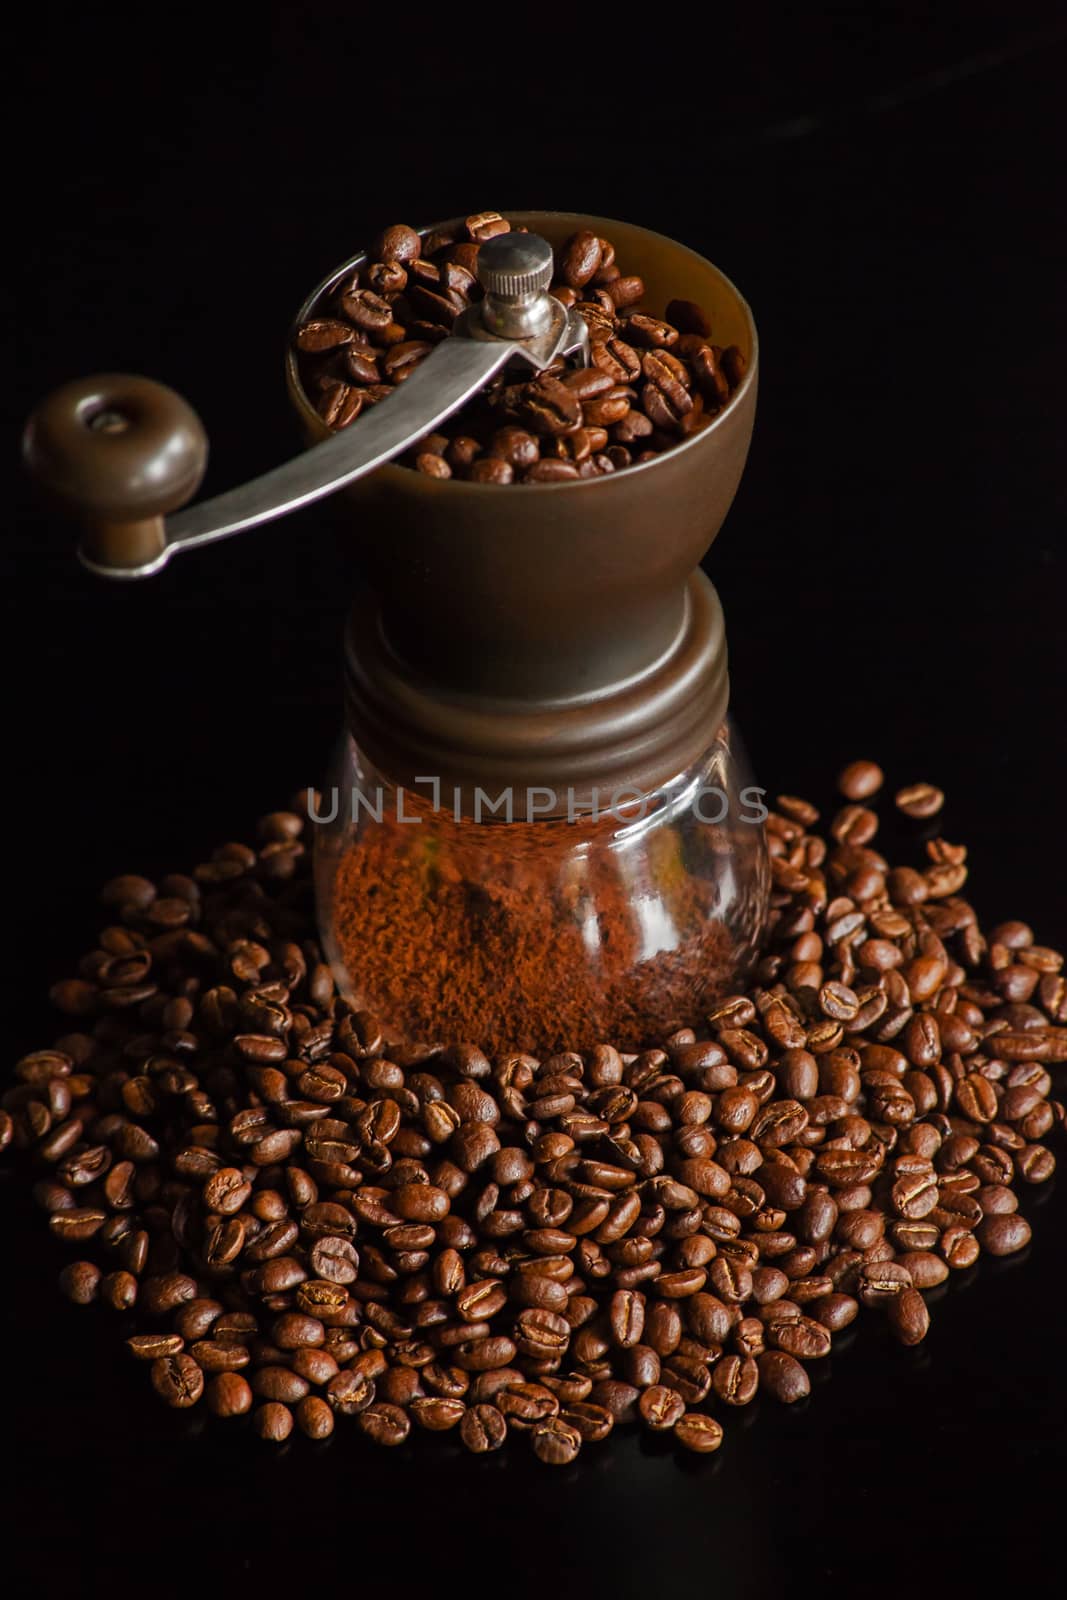 Coffee grinder with beans 13176 by kobus_peche